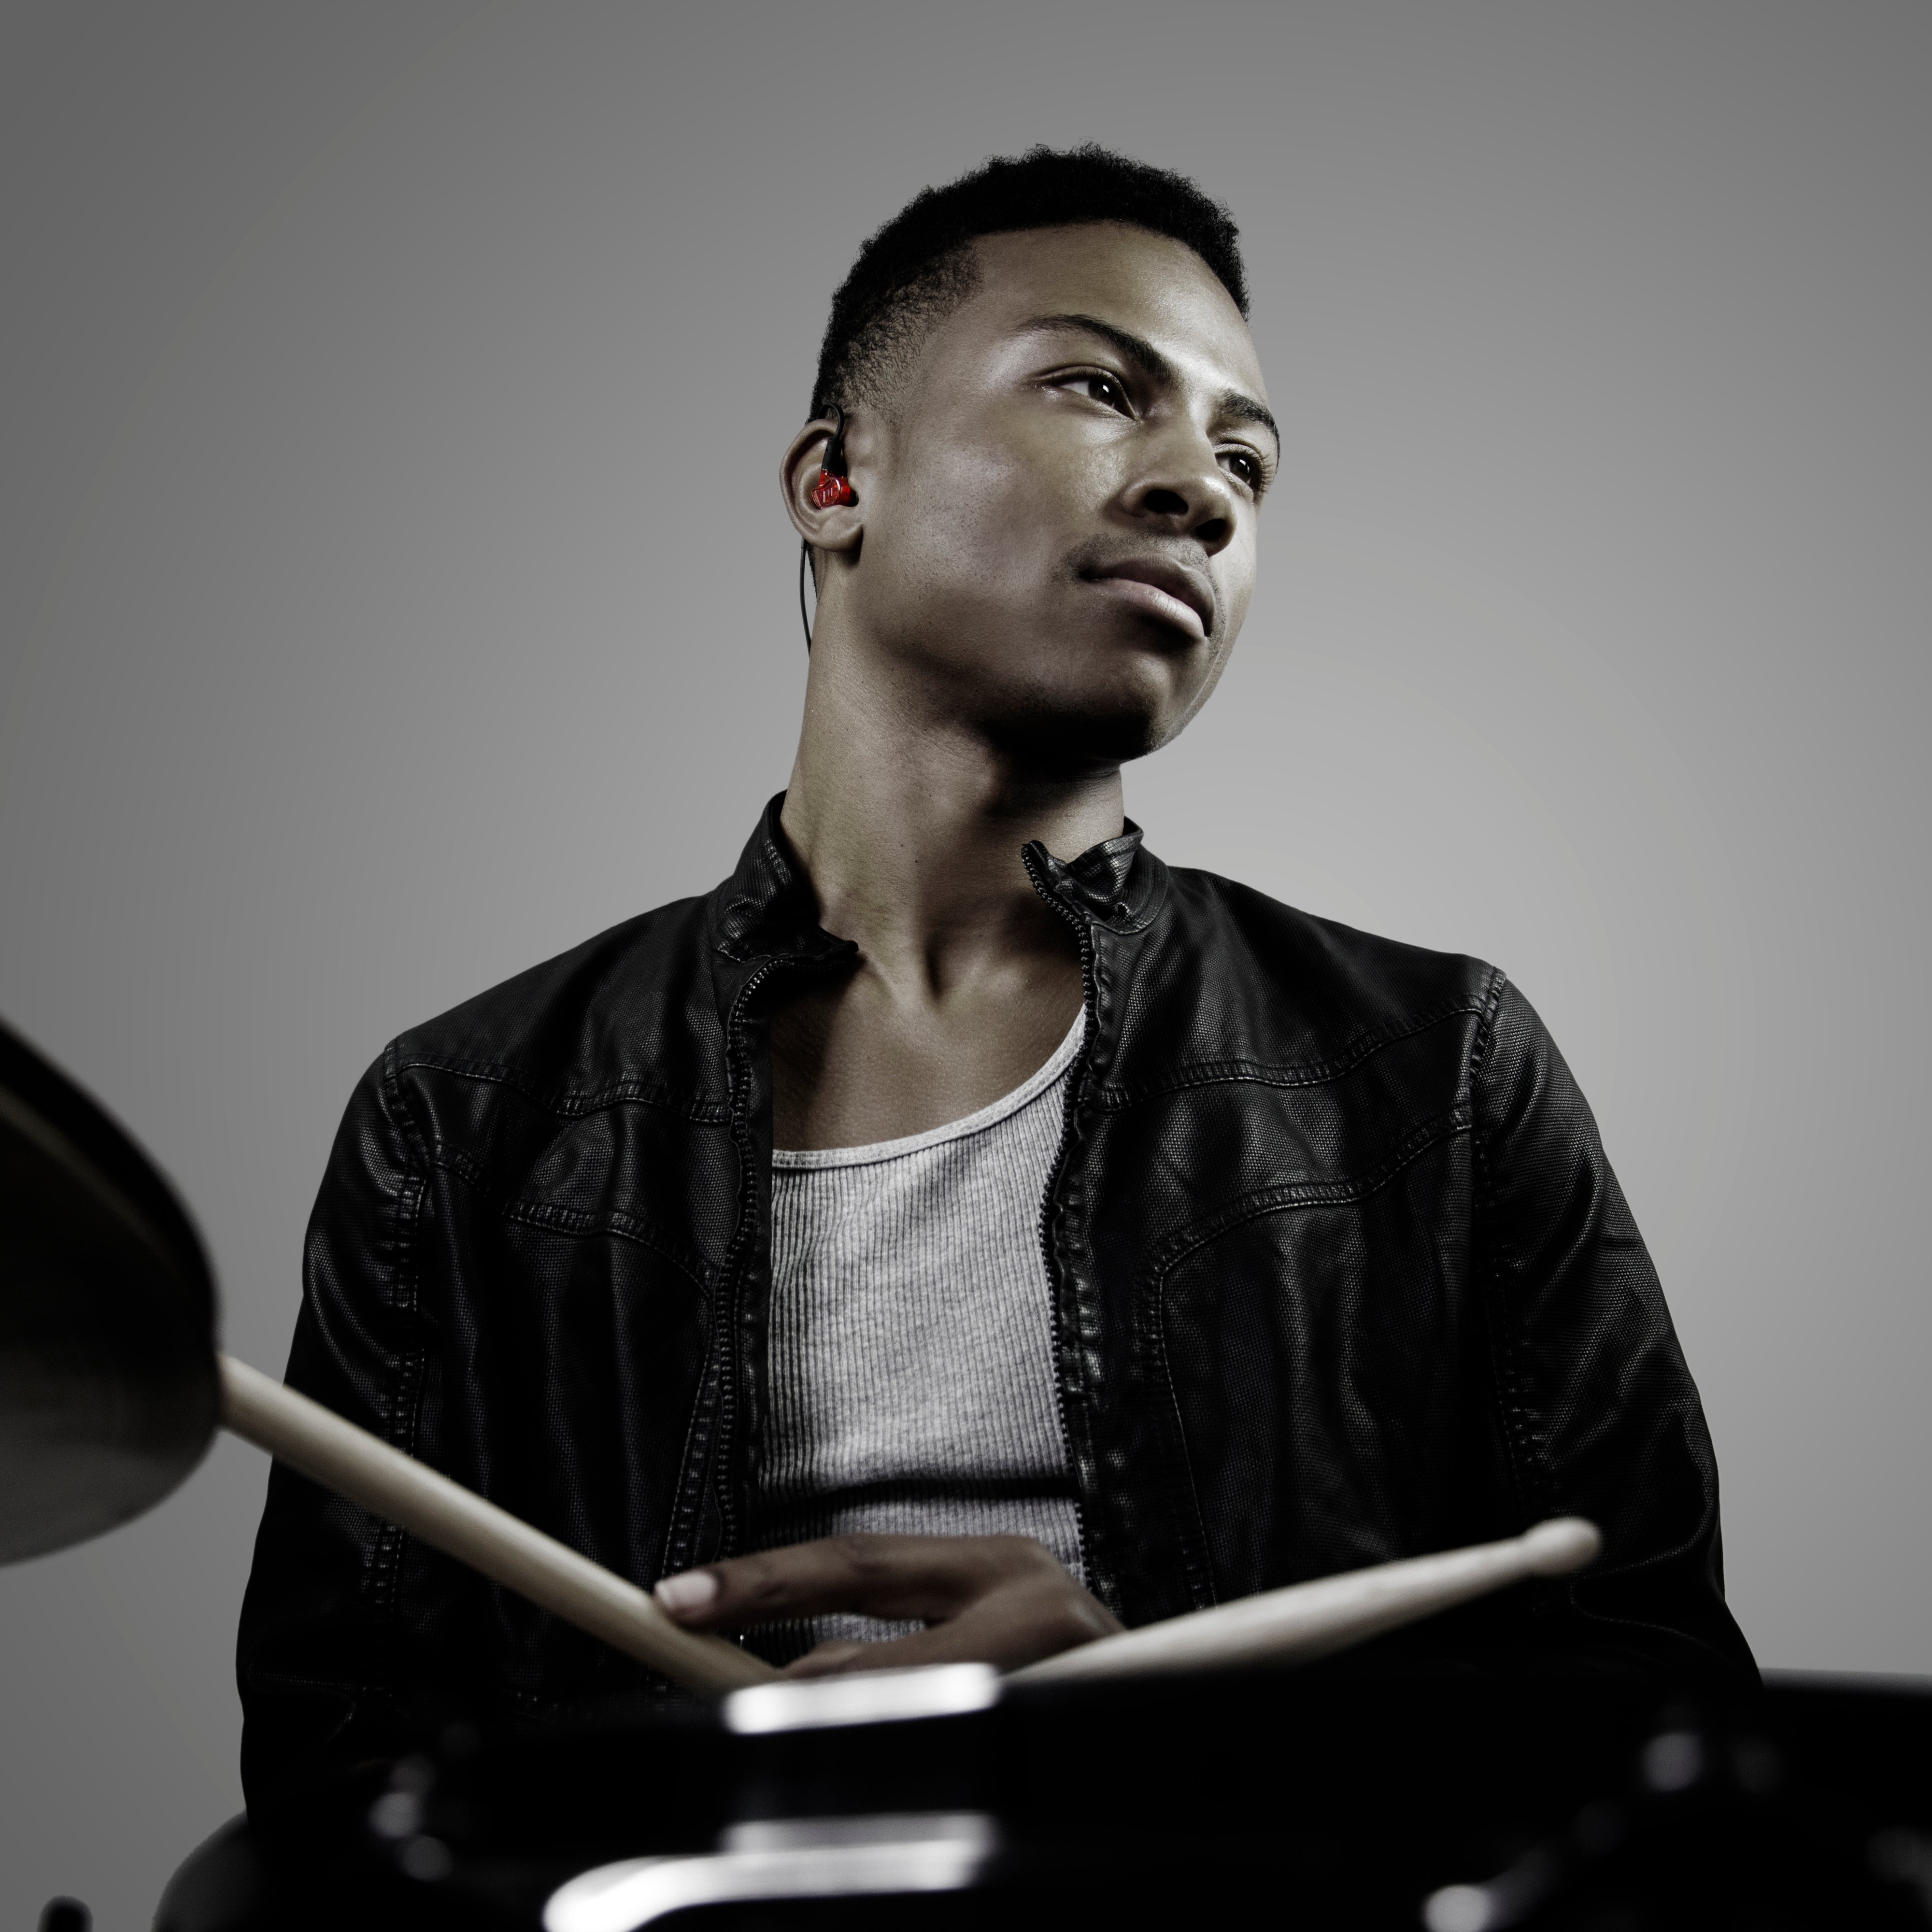 A young male drummer wearing a leather jacket sits behind a drum kit, looking to his left with a focused expression. he holds drumsticks and wears earphones.